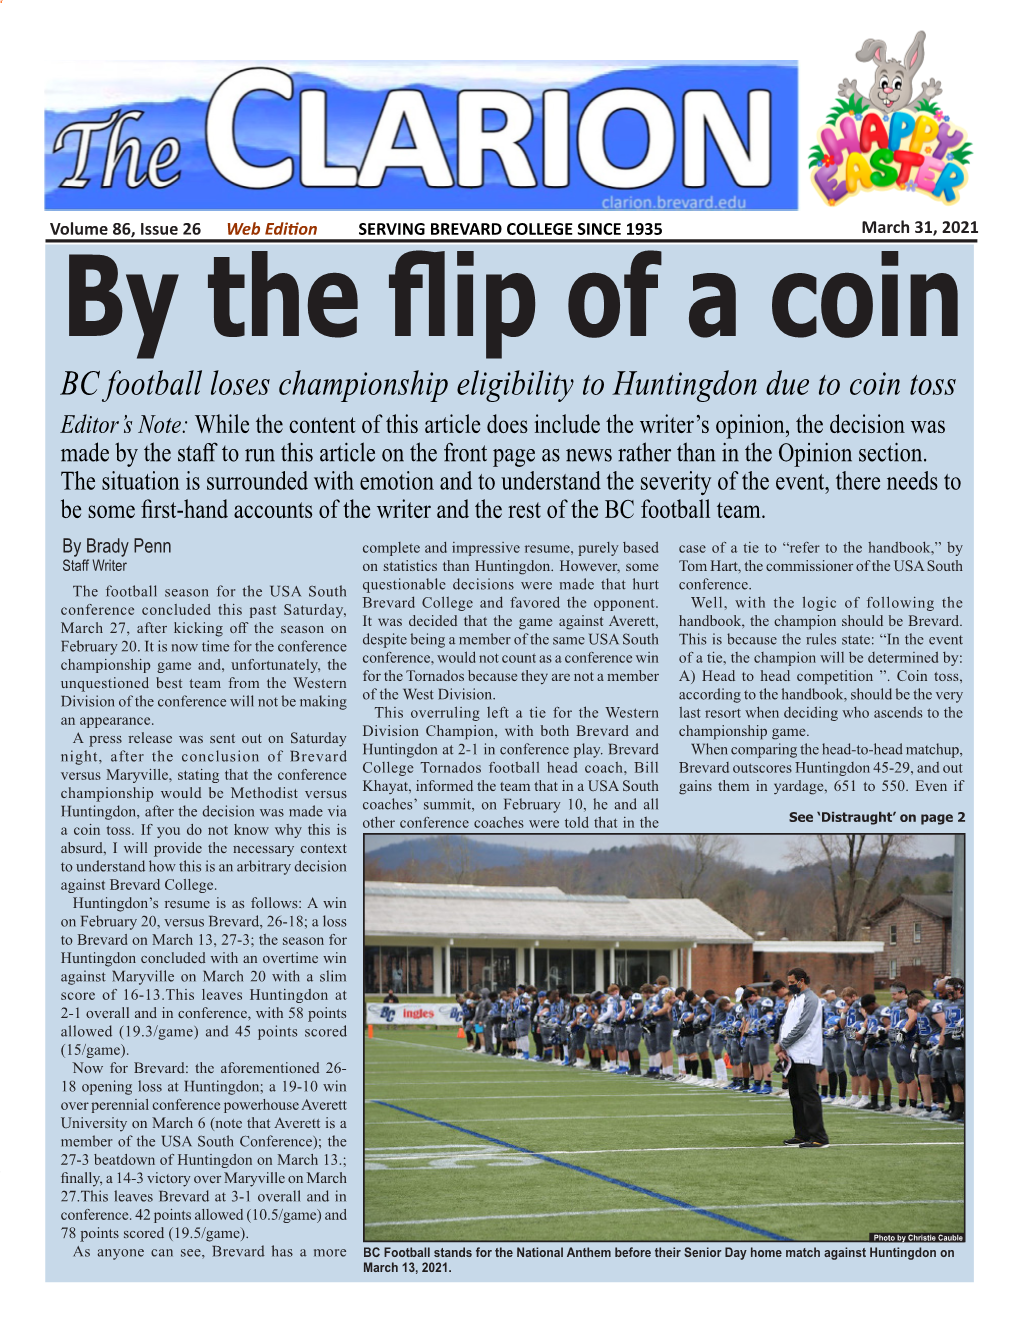 The Clarion, Vol. 84, Issue #10, Nov. 7, 2018